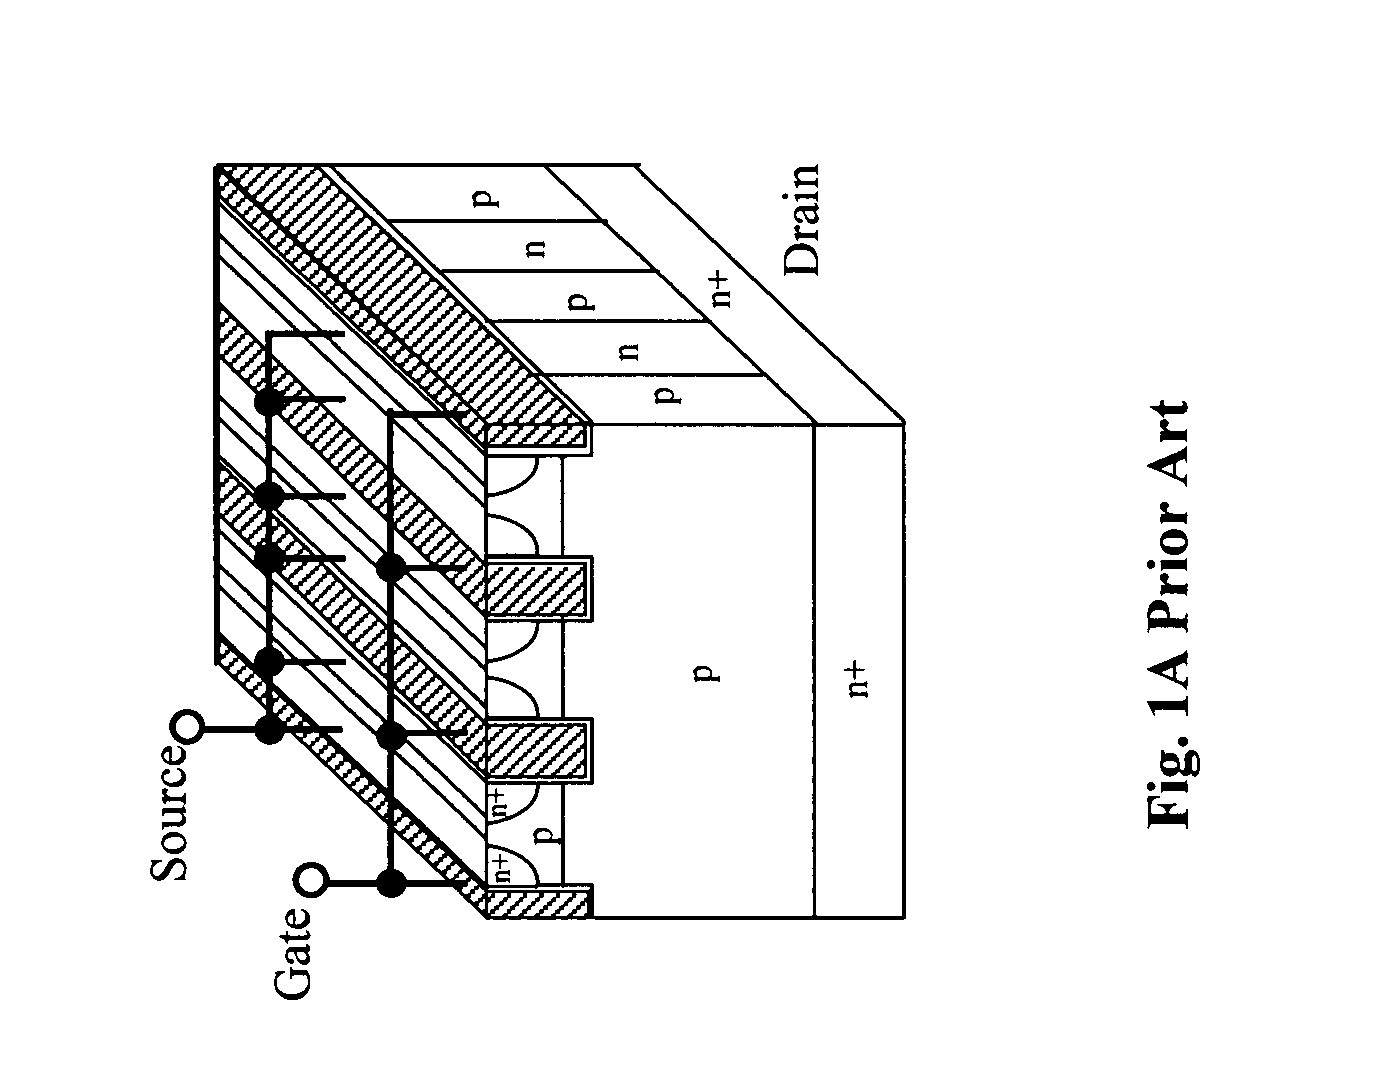 Lateral super junction device with high substrate-drain breakdown and built-in avalanche clamp diode